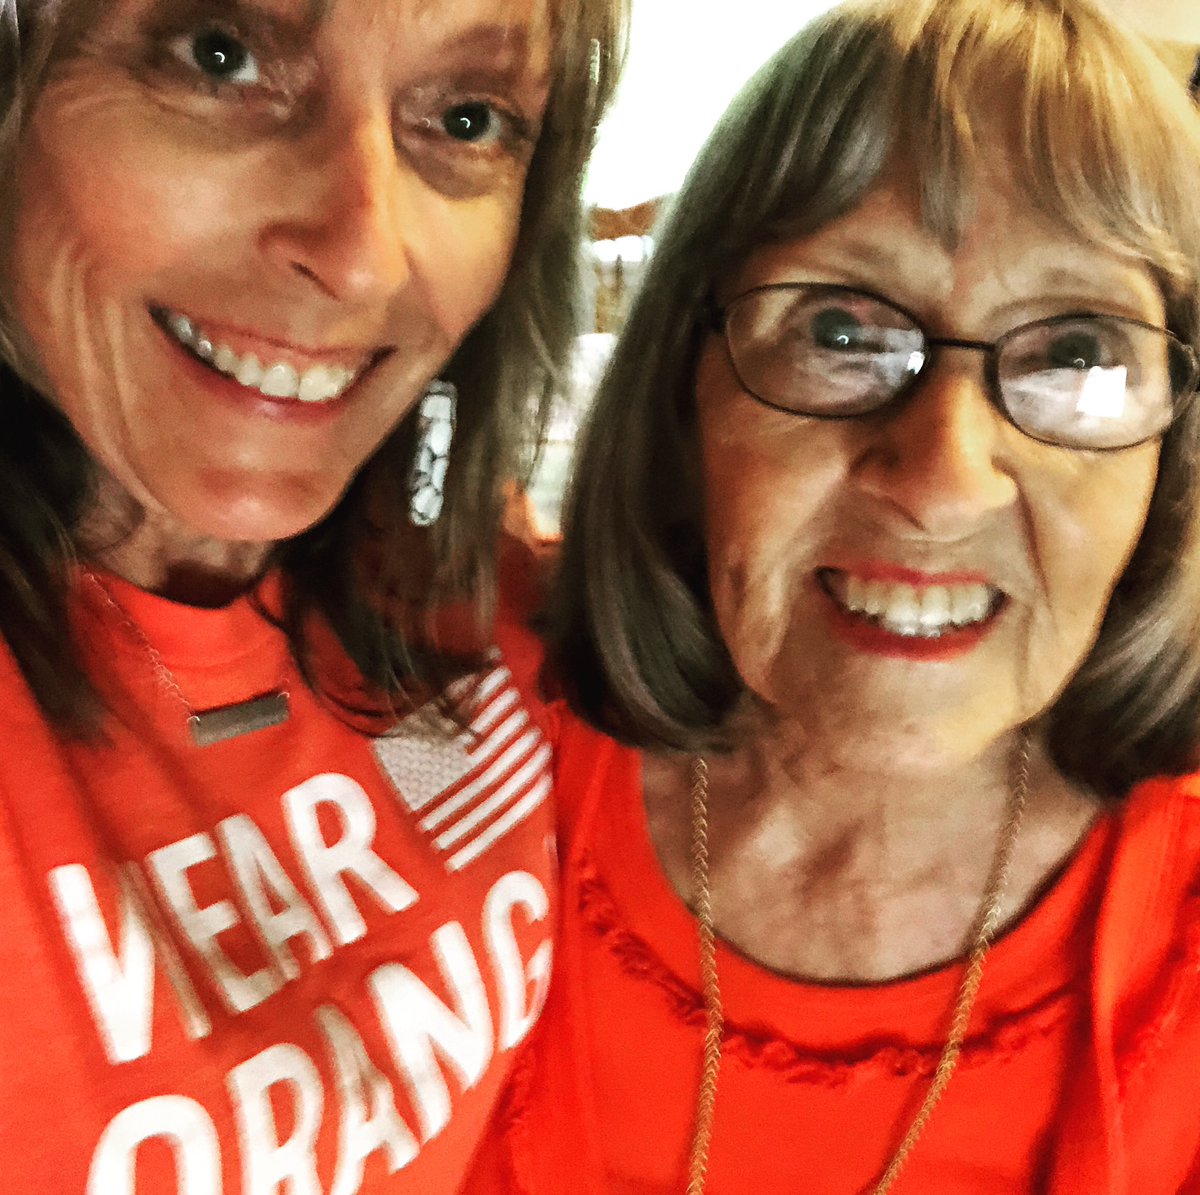 My little mother just left this earth, & sadly she left it still worried about gun violence &  #FedUp with Congress’s inaction. She’s gone this #MothersDay, but all she’d want is reinstatement of the Bipartisan Assault Weapons Ban & safety for all children. #NotOneMore